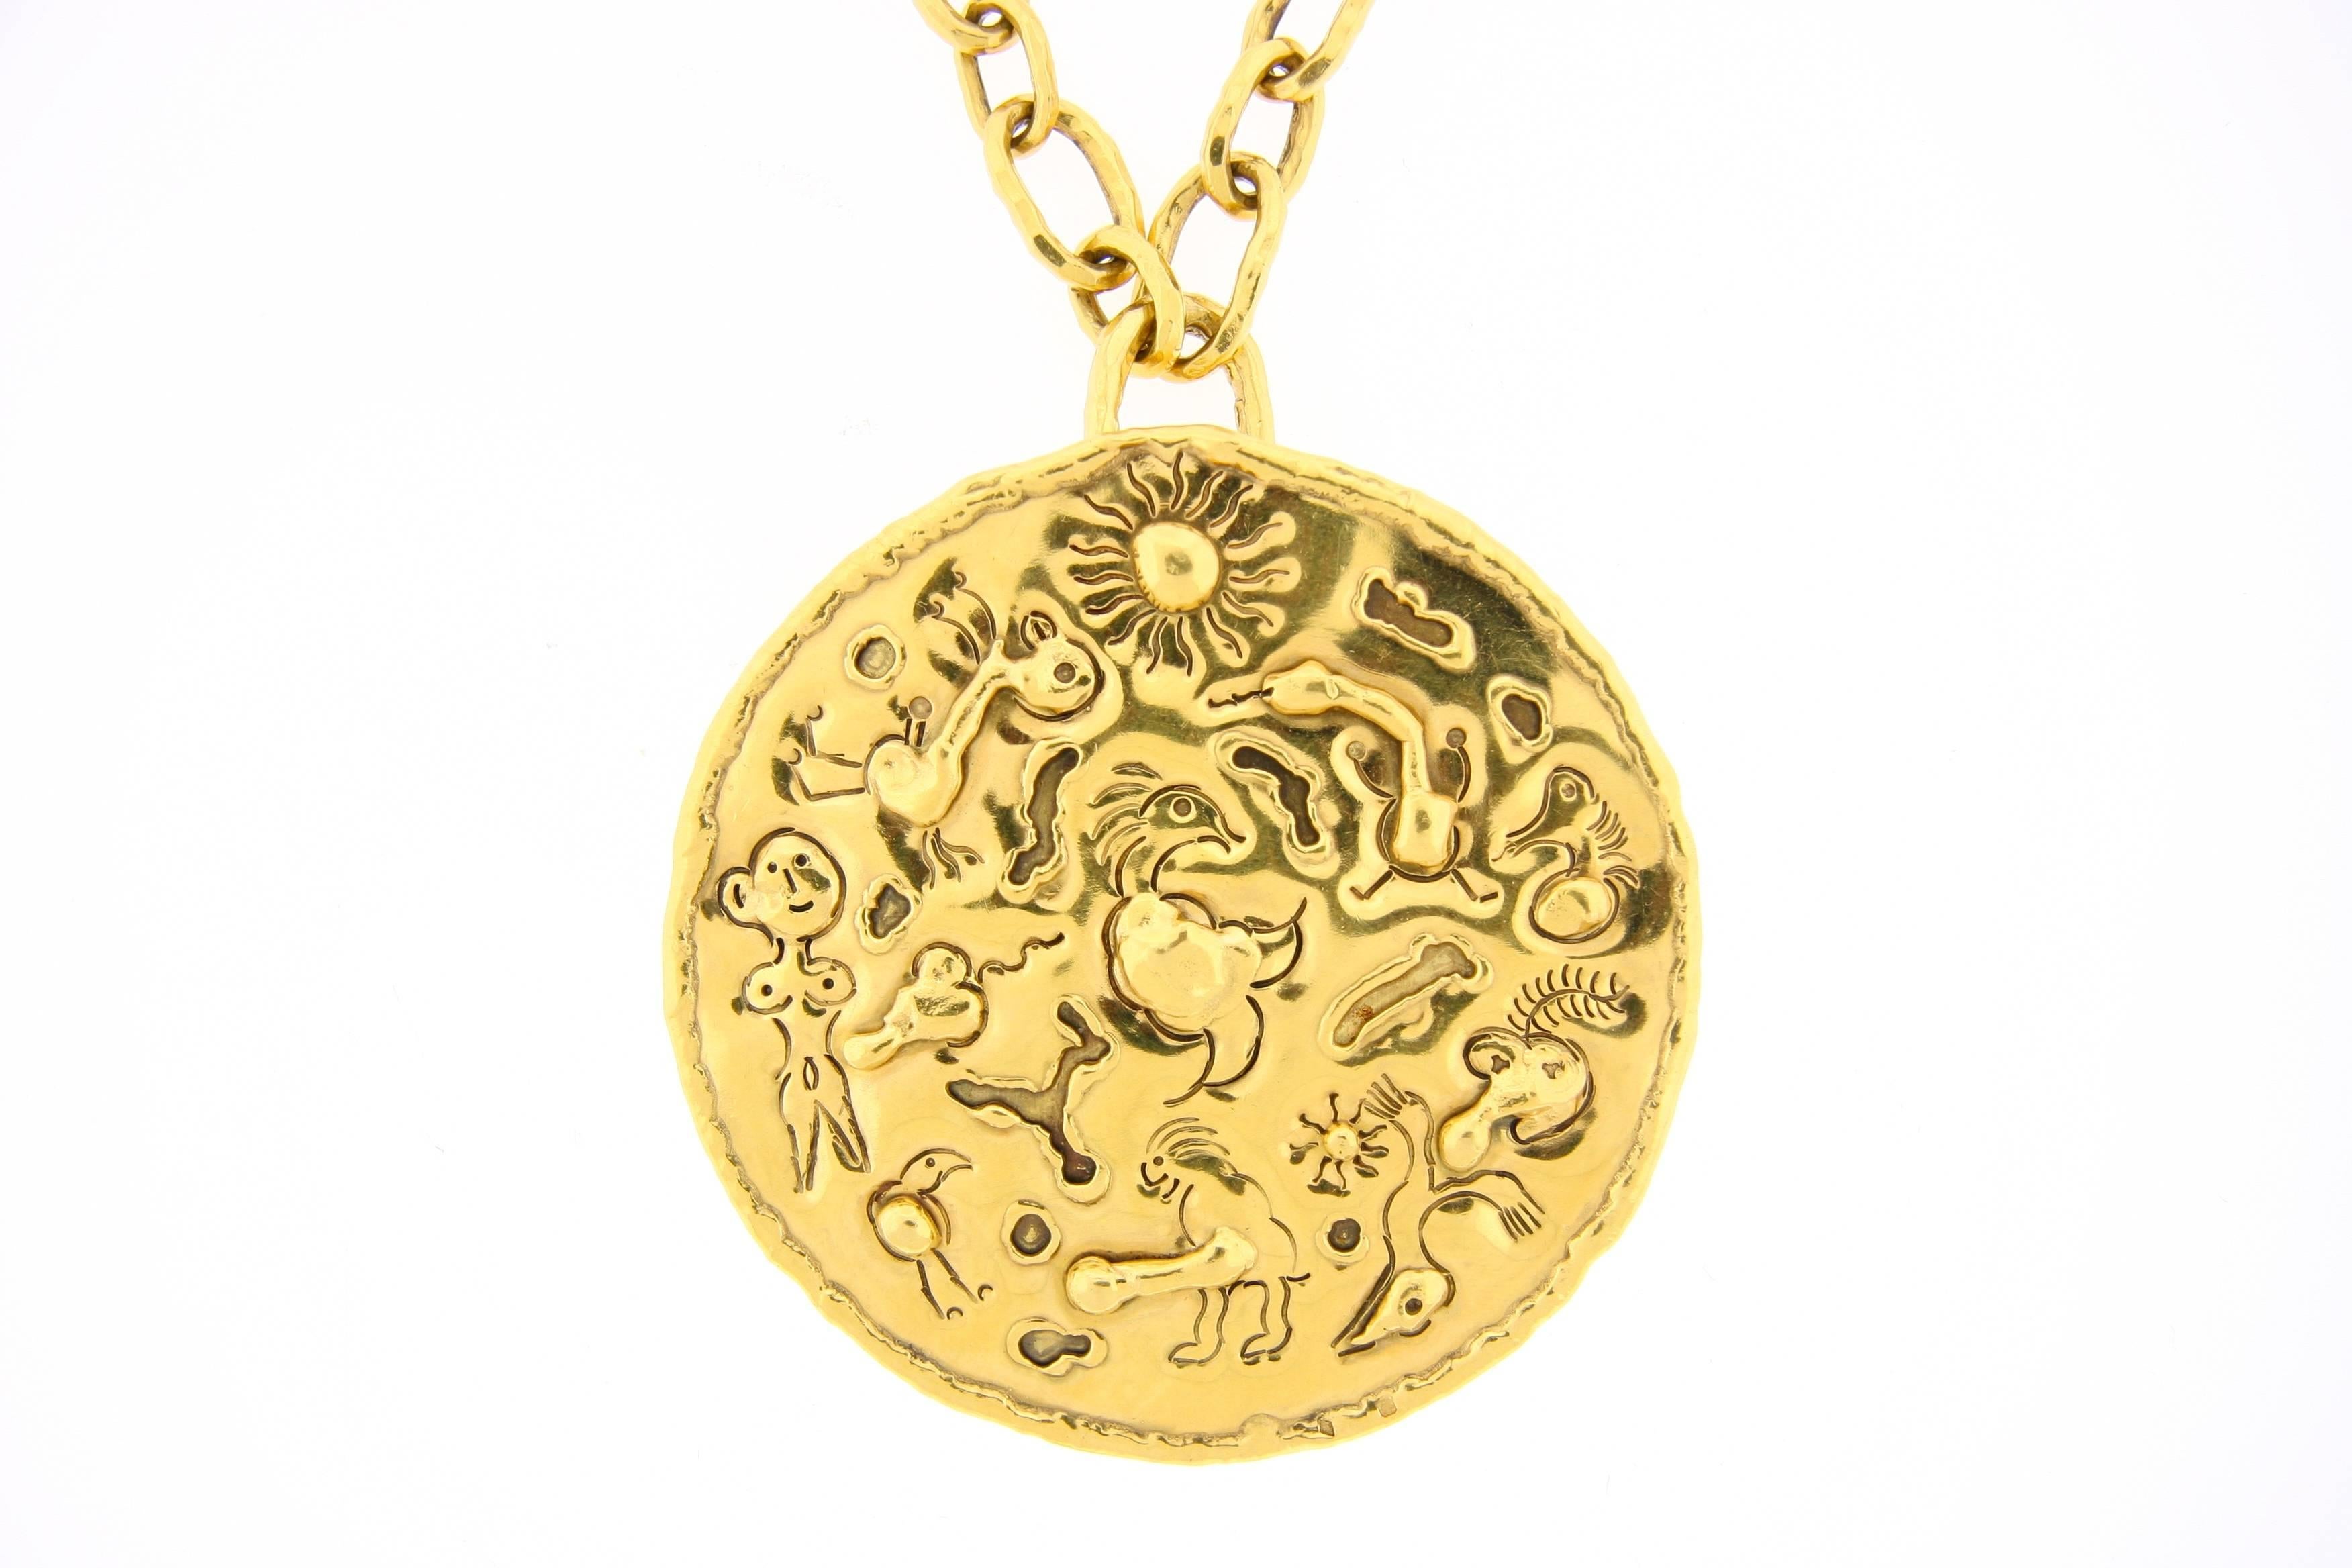 Jean Mahie handmade 22k gold necklace designed as a hammered, graduated, oblong link chain suspending a detachable round pendant of engraved and applied gold work. Chain is 15